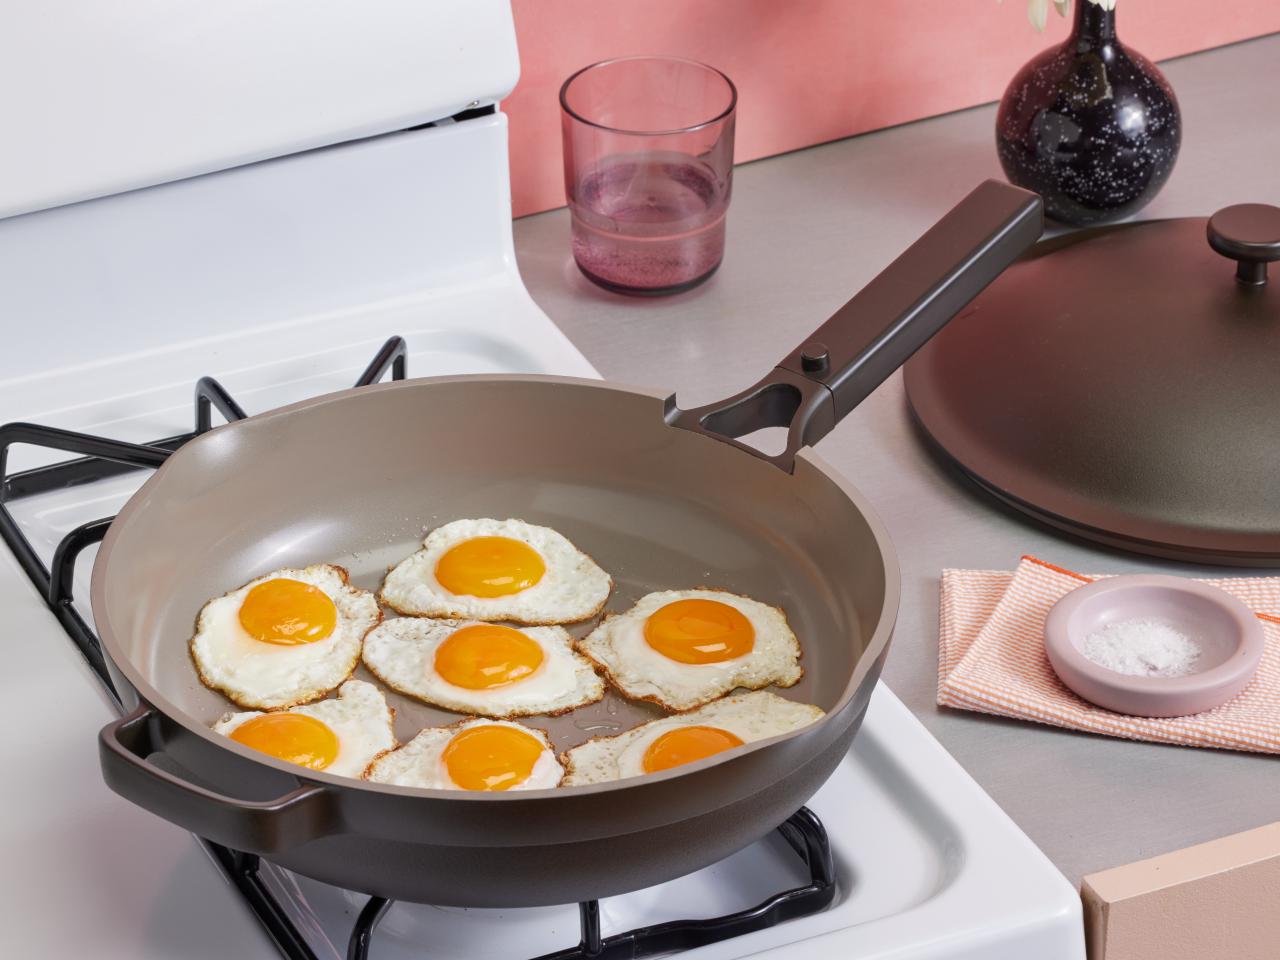 https://food.fnr.sndimg.com/content/dam/images/food/products/2023/8/11/rx_xl-always-pan-eggs.jpg.rend.hgtvcom.1280.960.suffix/1692043210975.jpeg